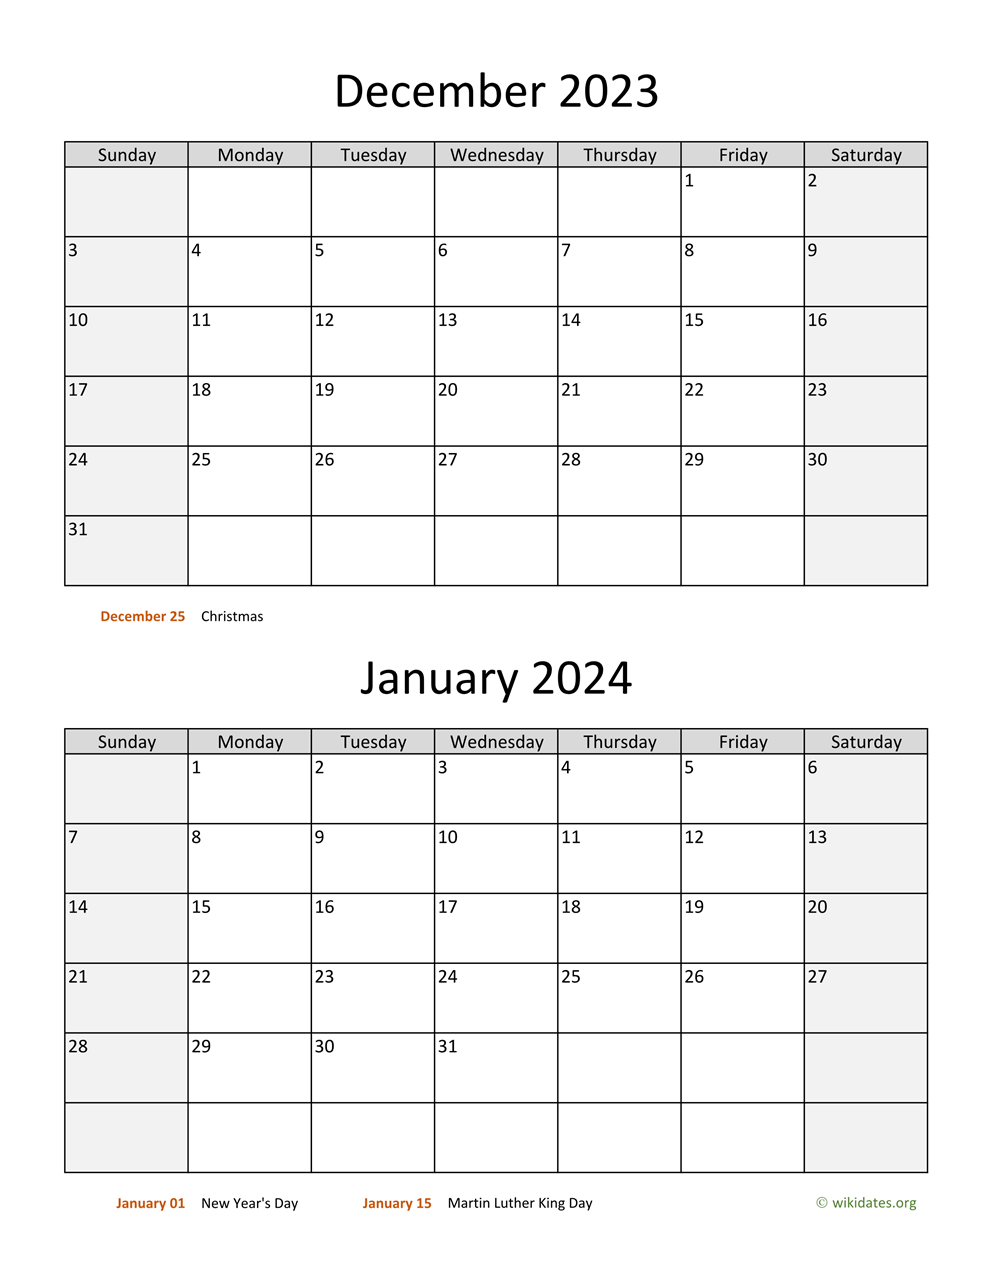 December 2023 And January 2024 Calendar | Wikidates for Free Printable Calendar December 2023 January 2024